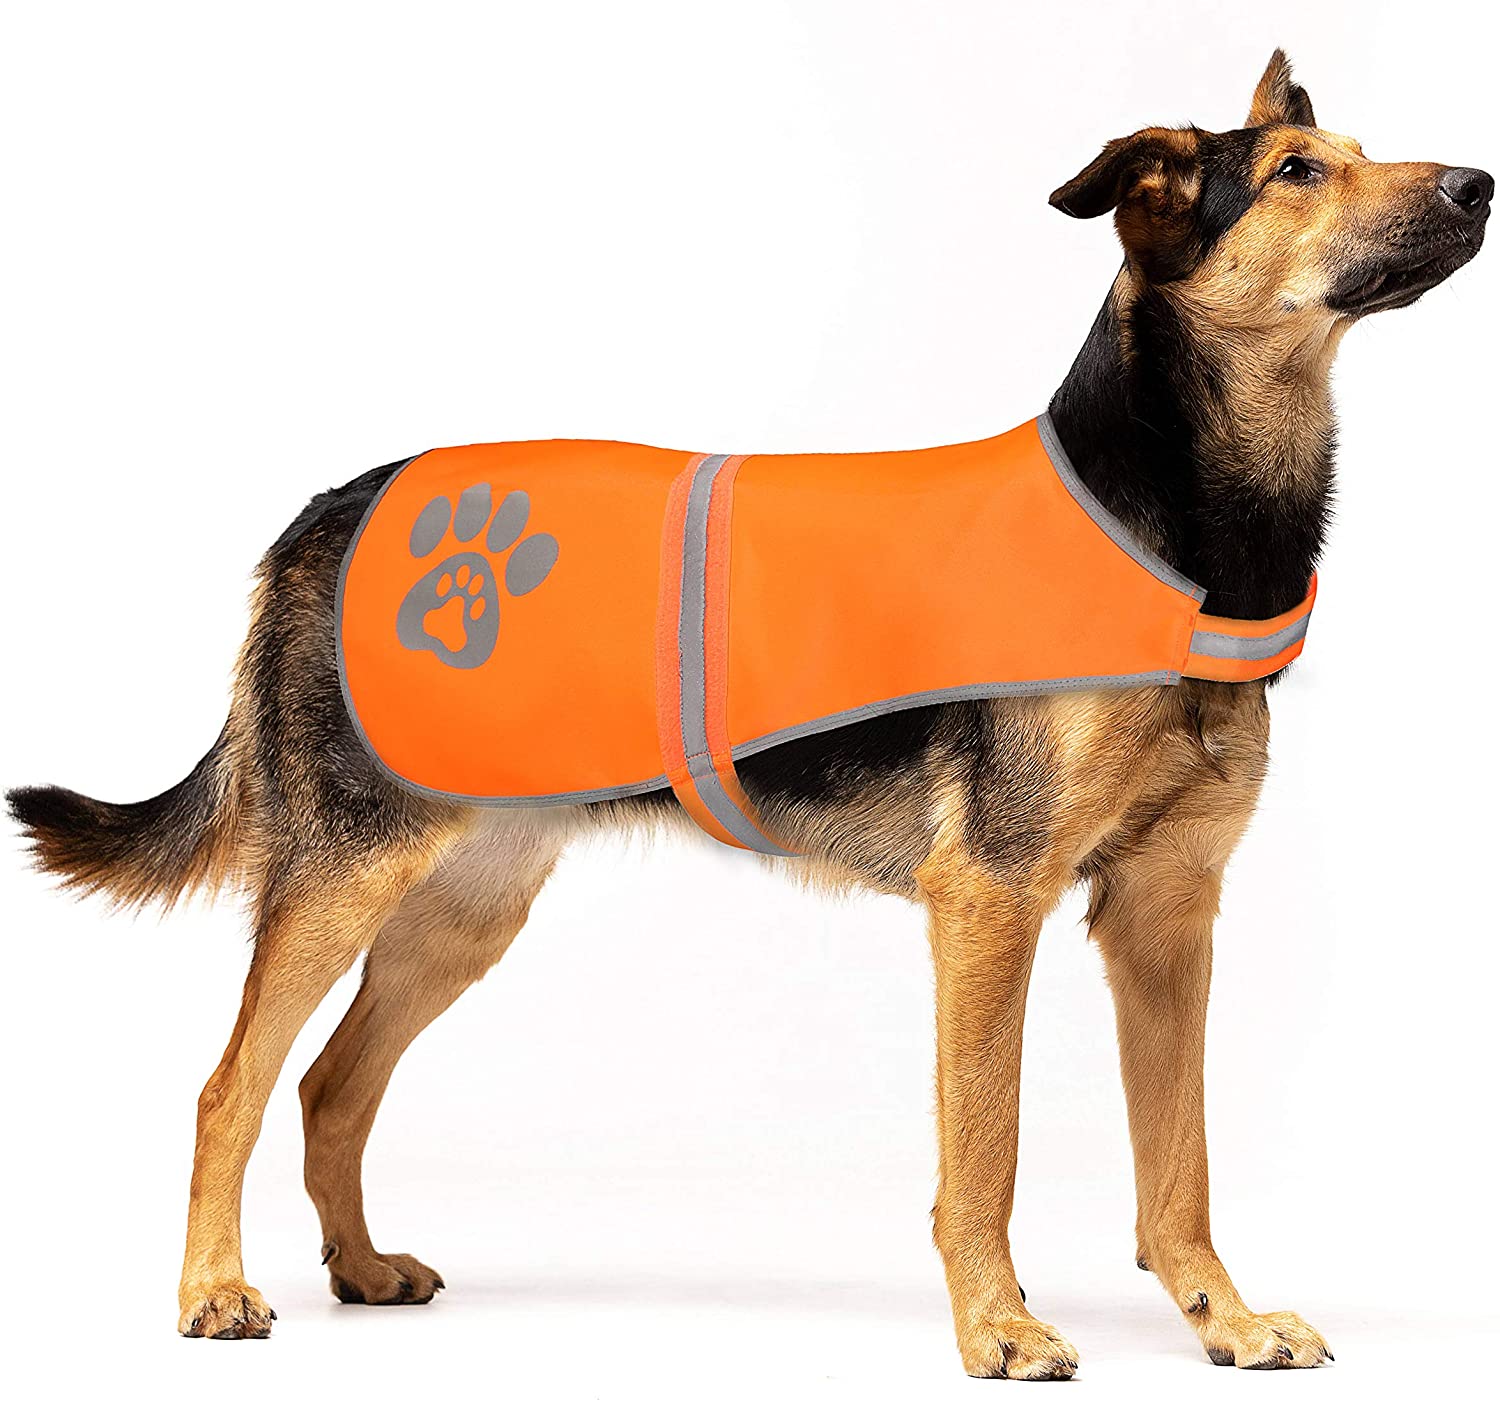 SPOFLY Reflective Safety Dog Vest, High Visibility Keep Dogs Visible Outdoor Activity Day and Night, Hunting and Walking, Dog Jacket for Small Medium and Large Dogs (Blaze Orange, L)